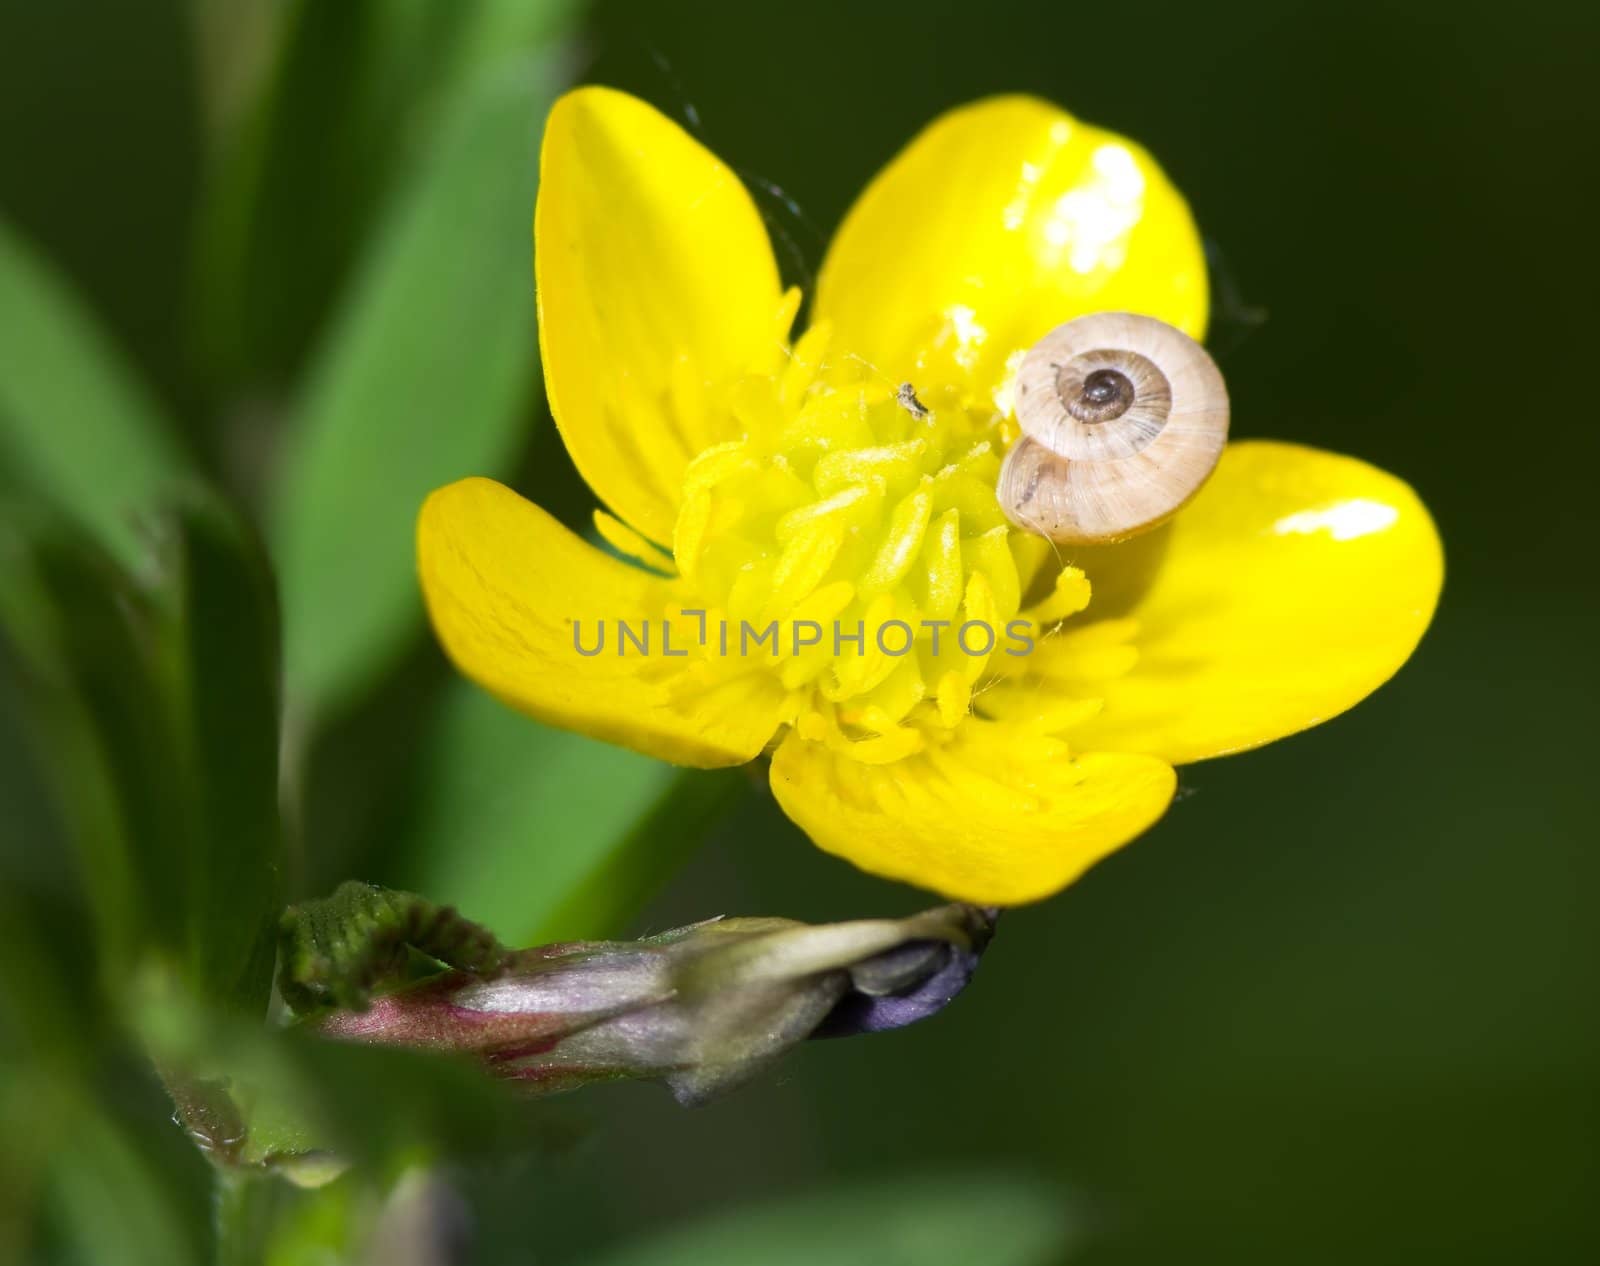 Snail on flower of buttercup an early spring day